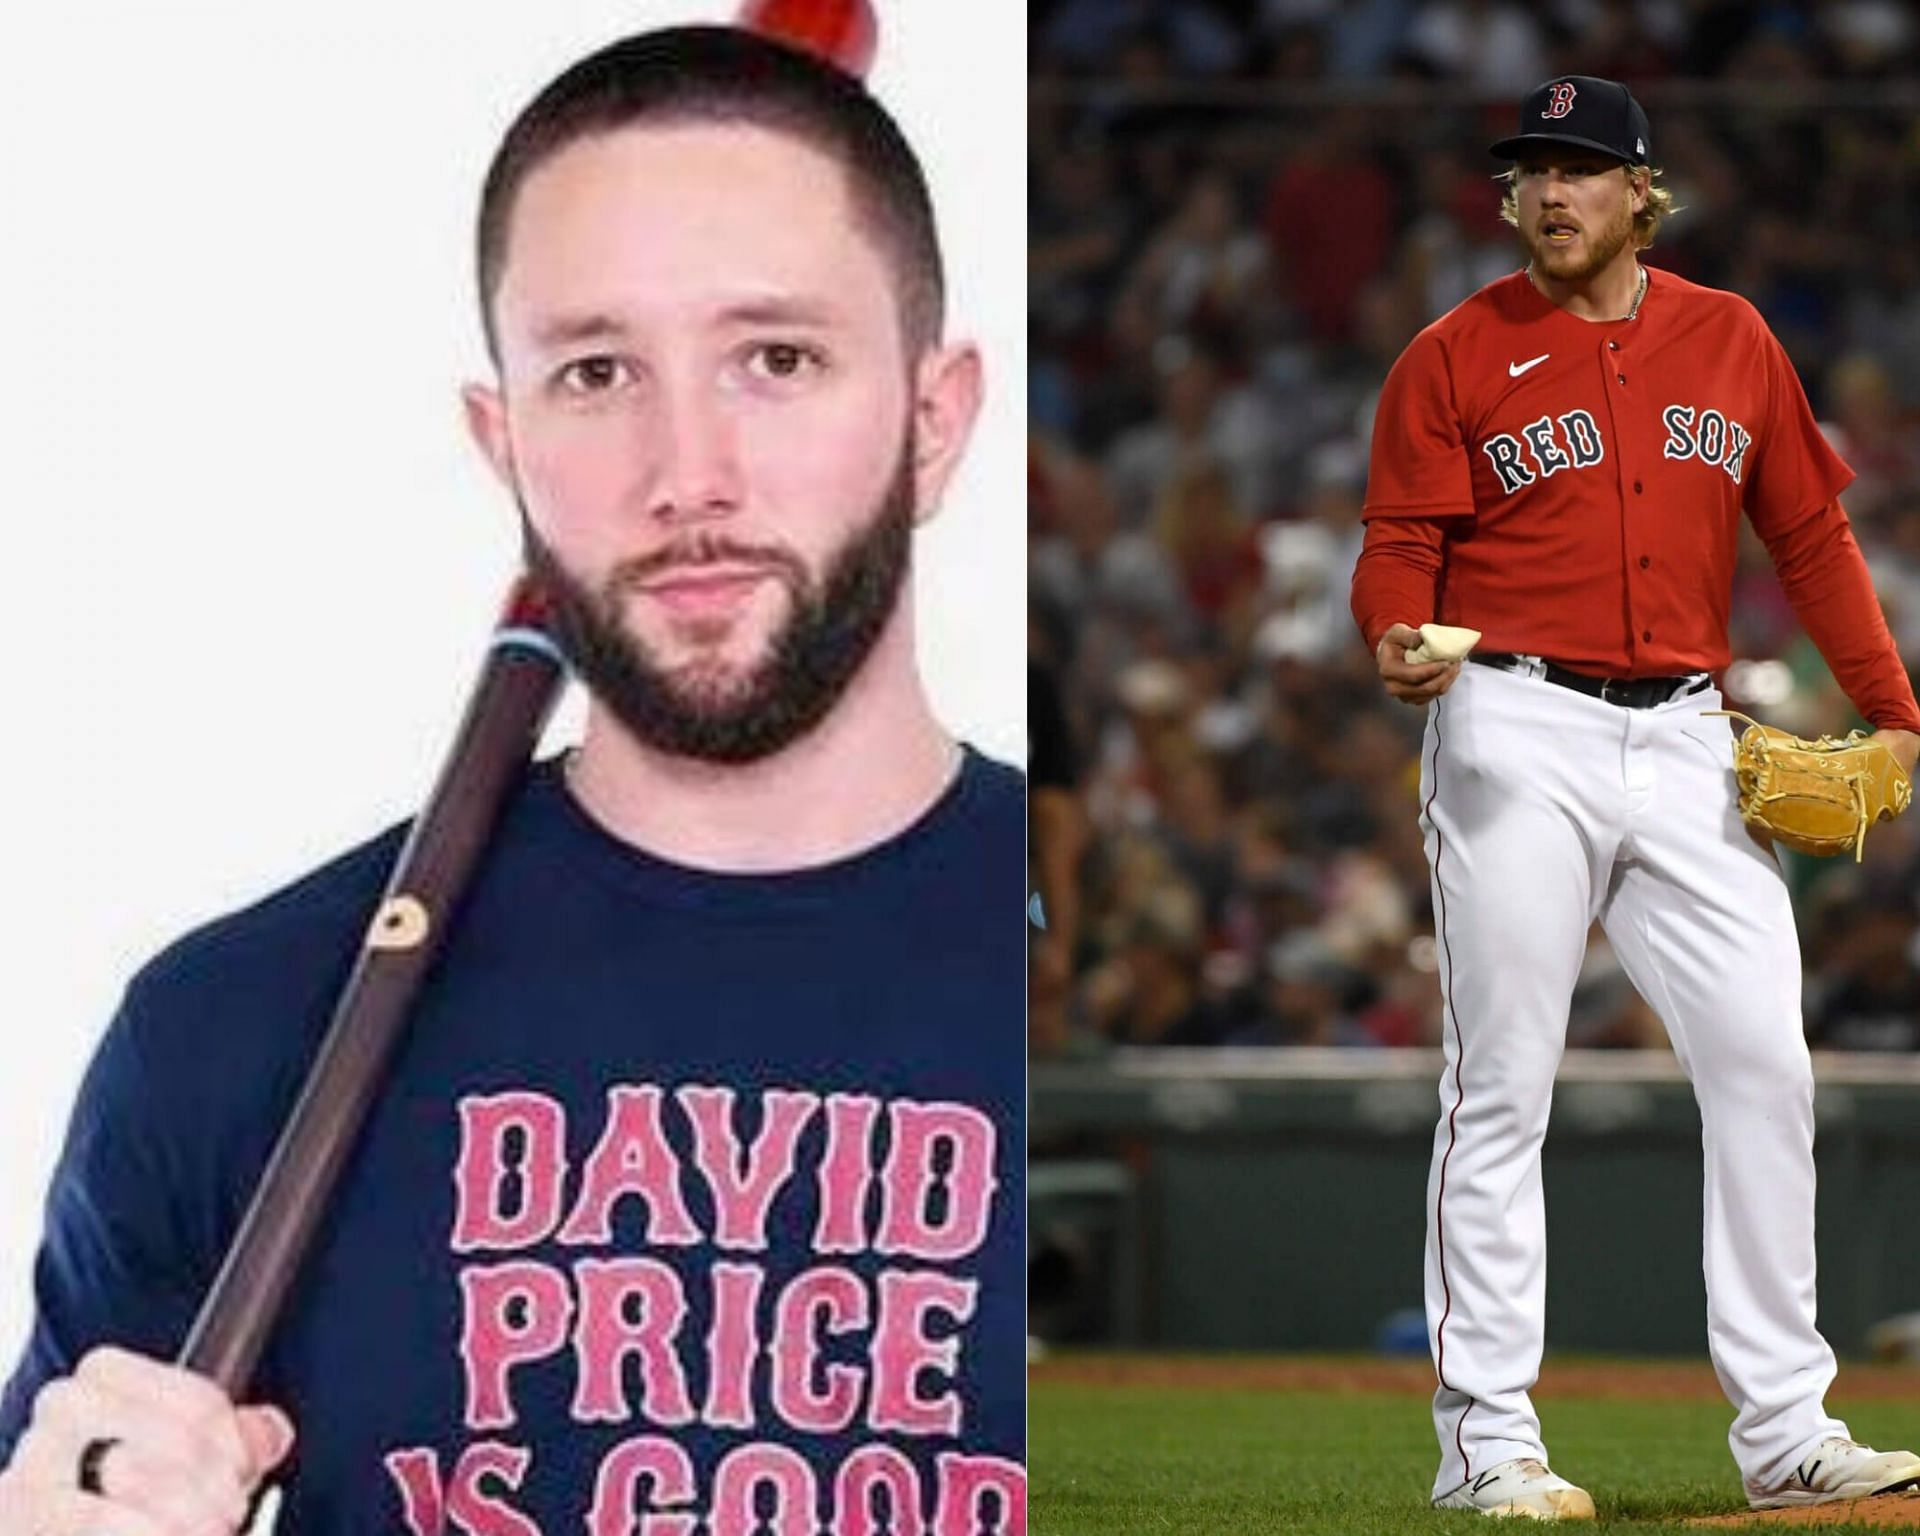 Red Sox pitcher Kaleb Ort has blocked Jared Carrabis on Twitter